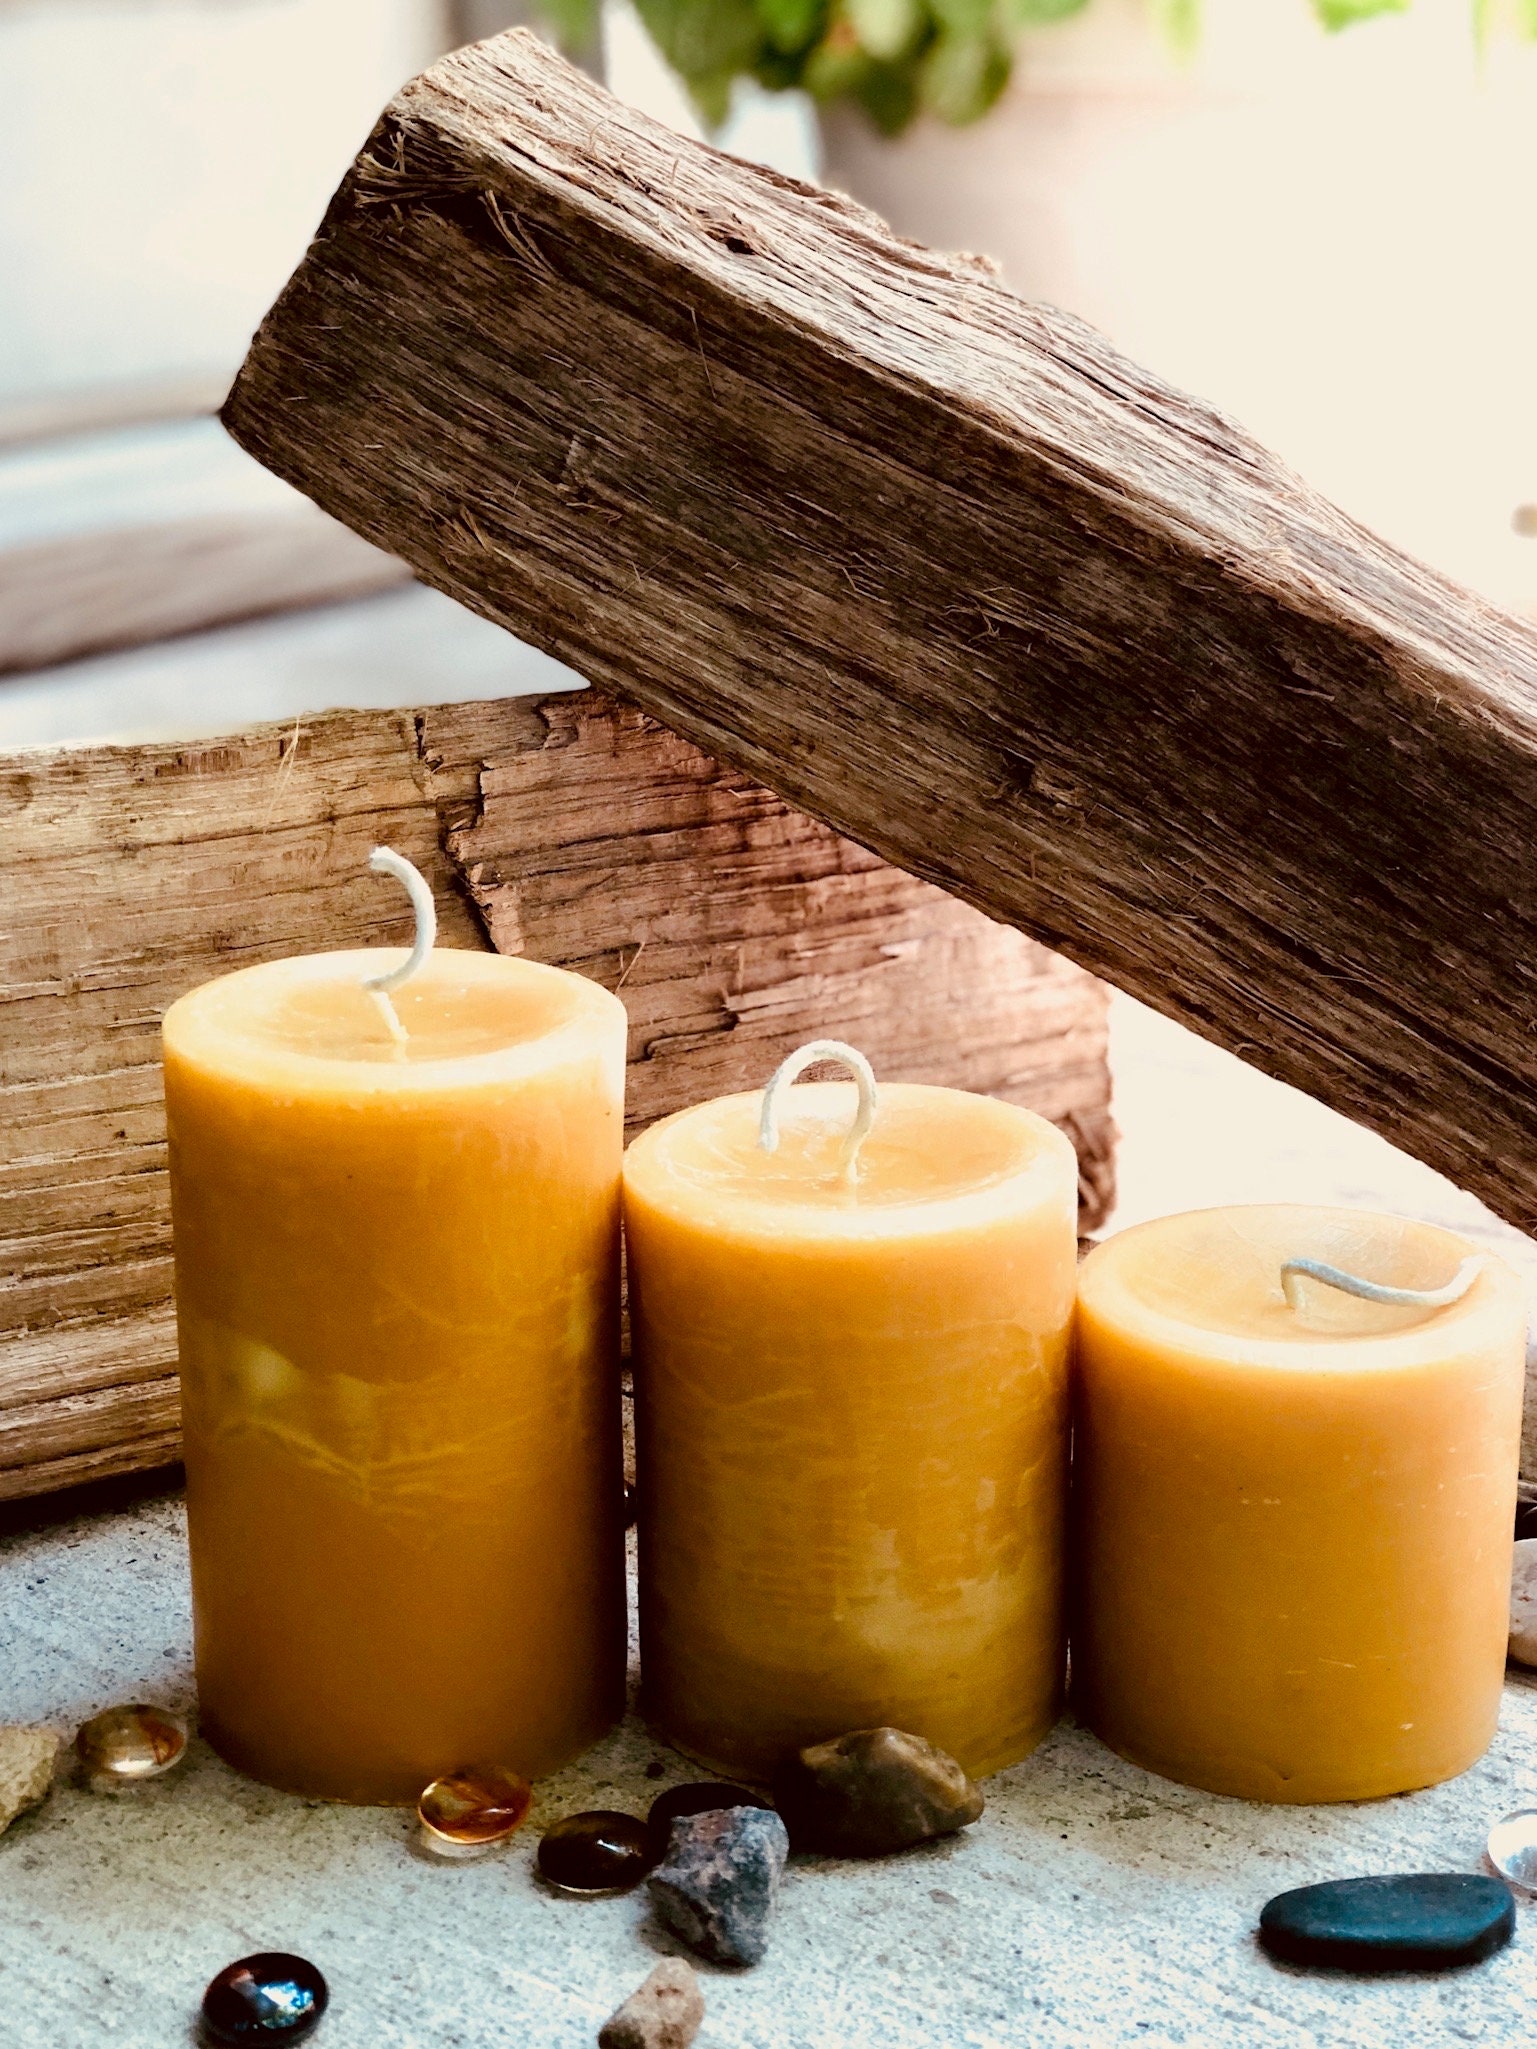 Hope&Need Beeswax Pillar Candles- 3 Pieces (2.8 Inches x 2 Inches) %100 Pure Bees Wax Candles for Home Decoration, Healthy and Natural Honeycomb